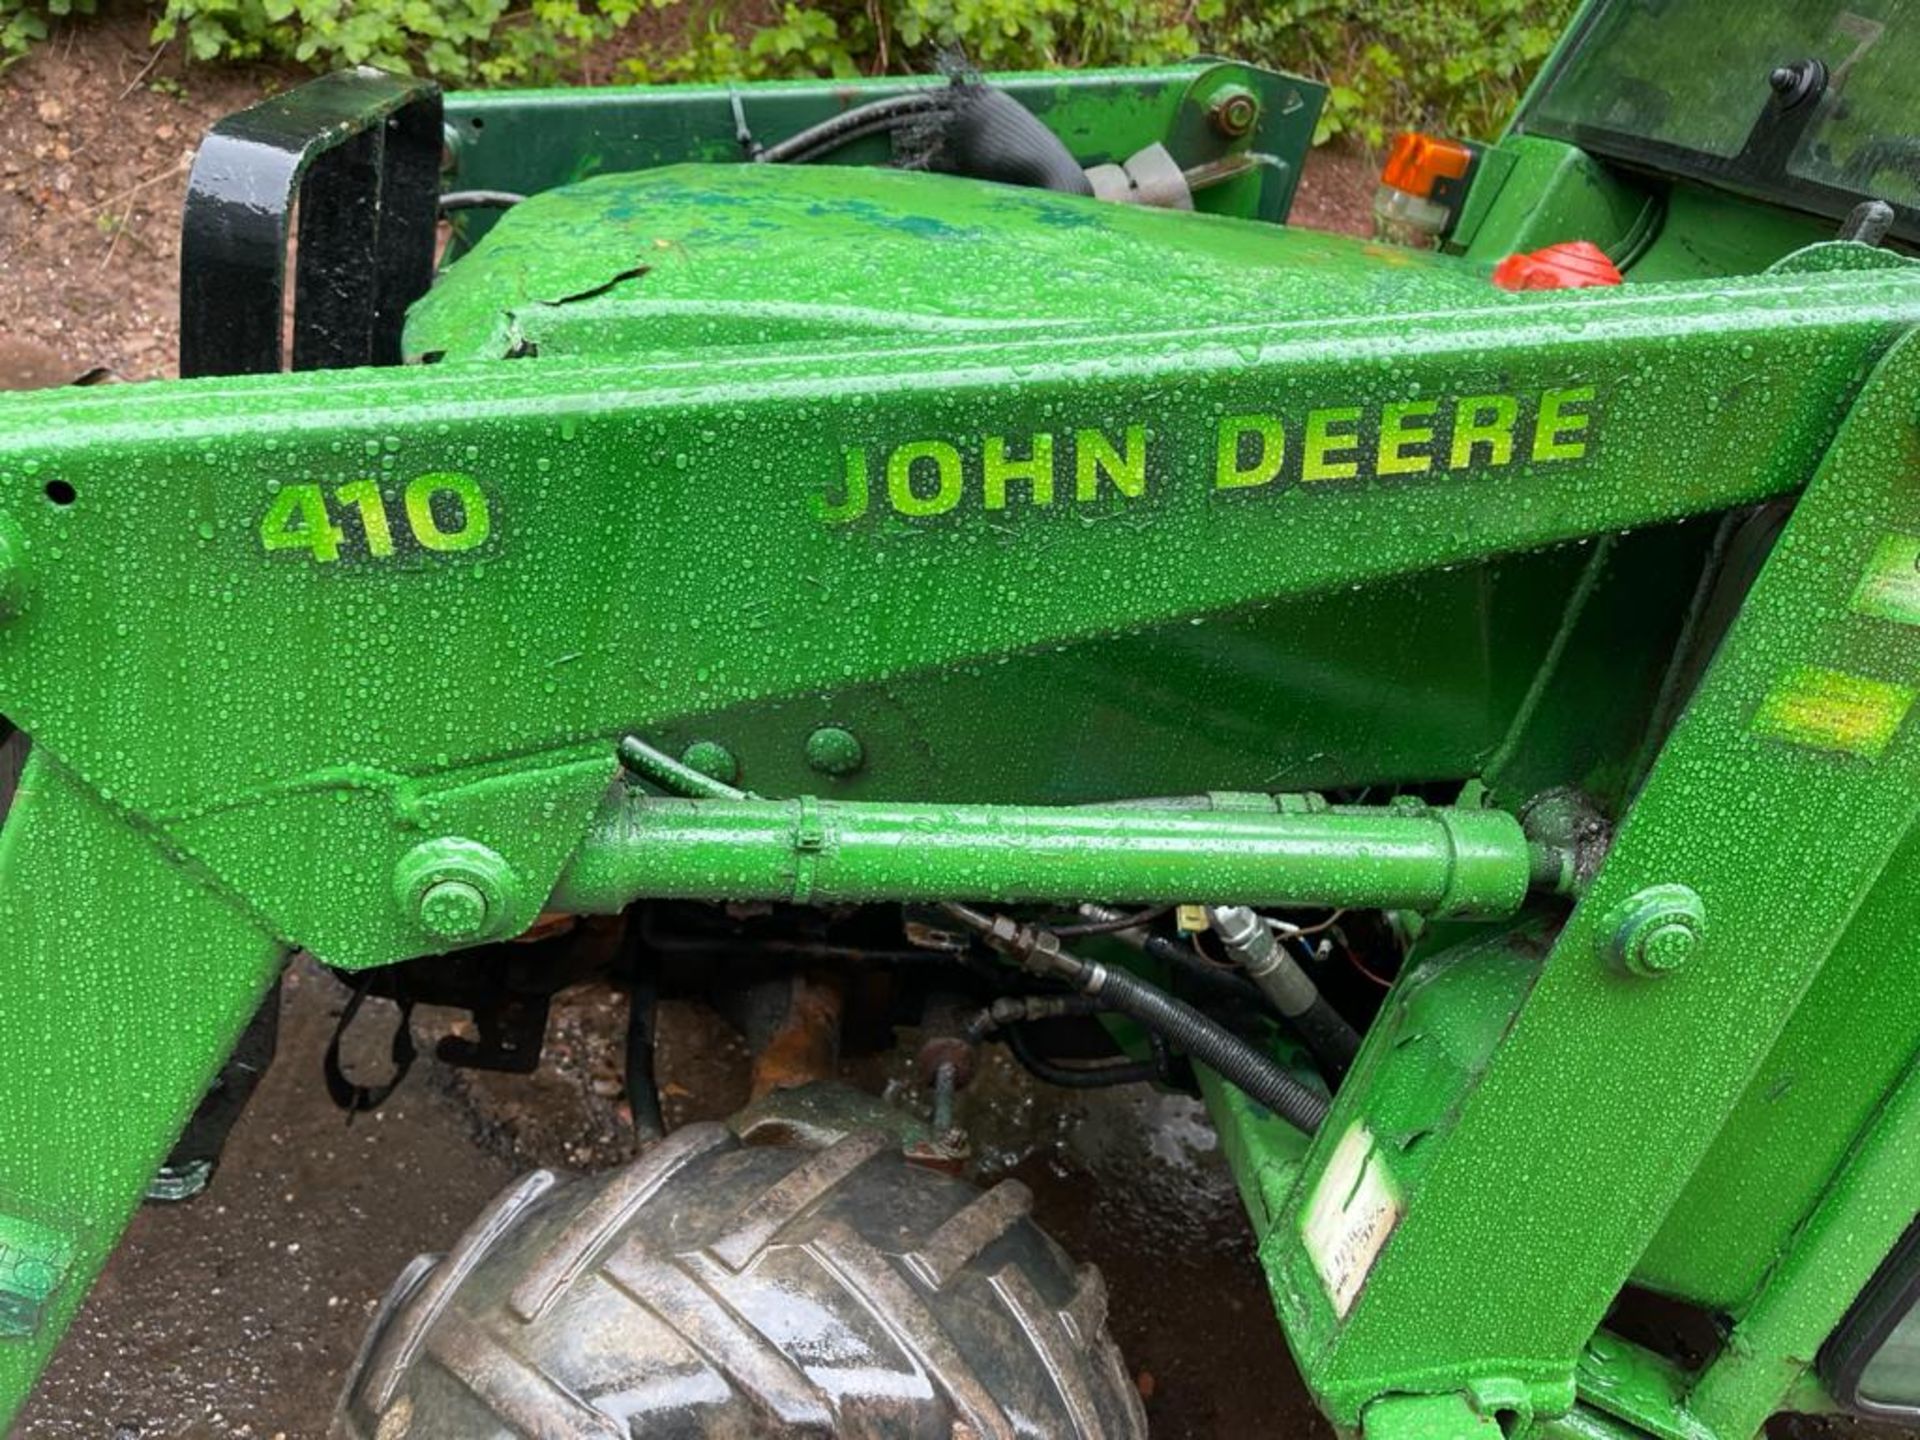 JOHN DEERE 4100 LOADER TRACTOR, 4 WHEEL DRIVE, RUNS, WORKS AND LIFTS *PLUS VAT* - Image 6 of 8